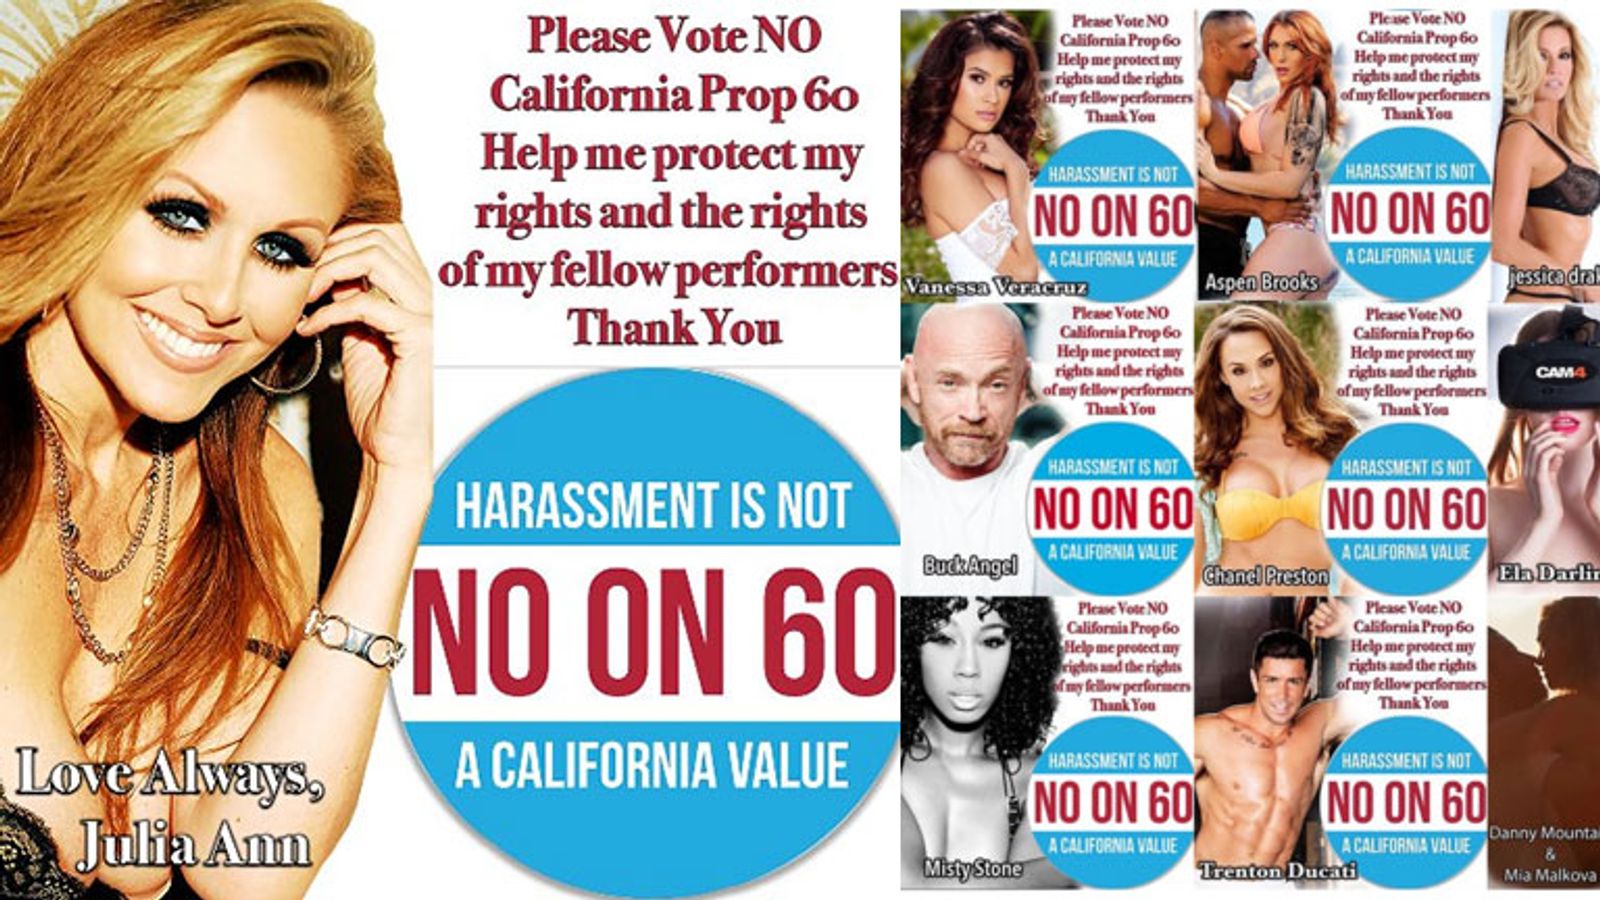 Adult Superstar Julia Ann Leads The Fight Against Prop 60